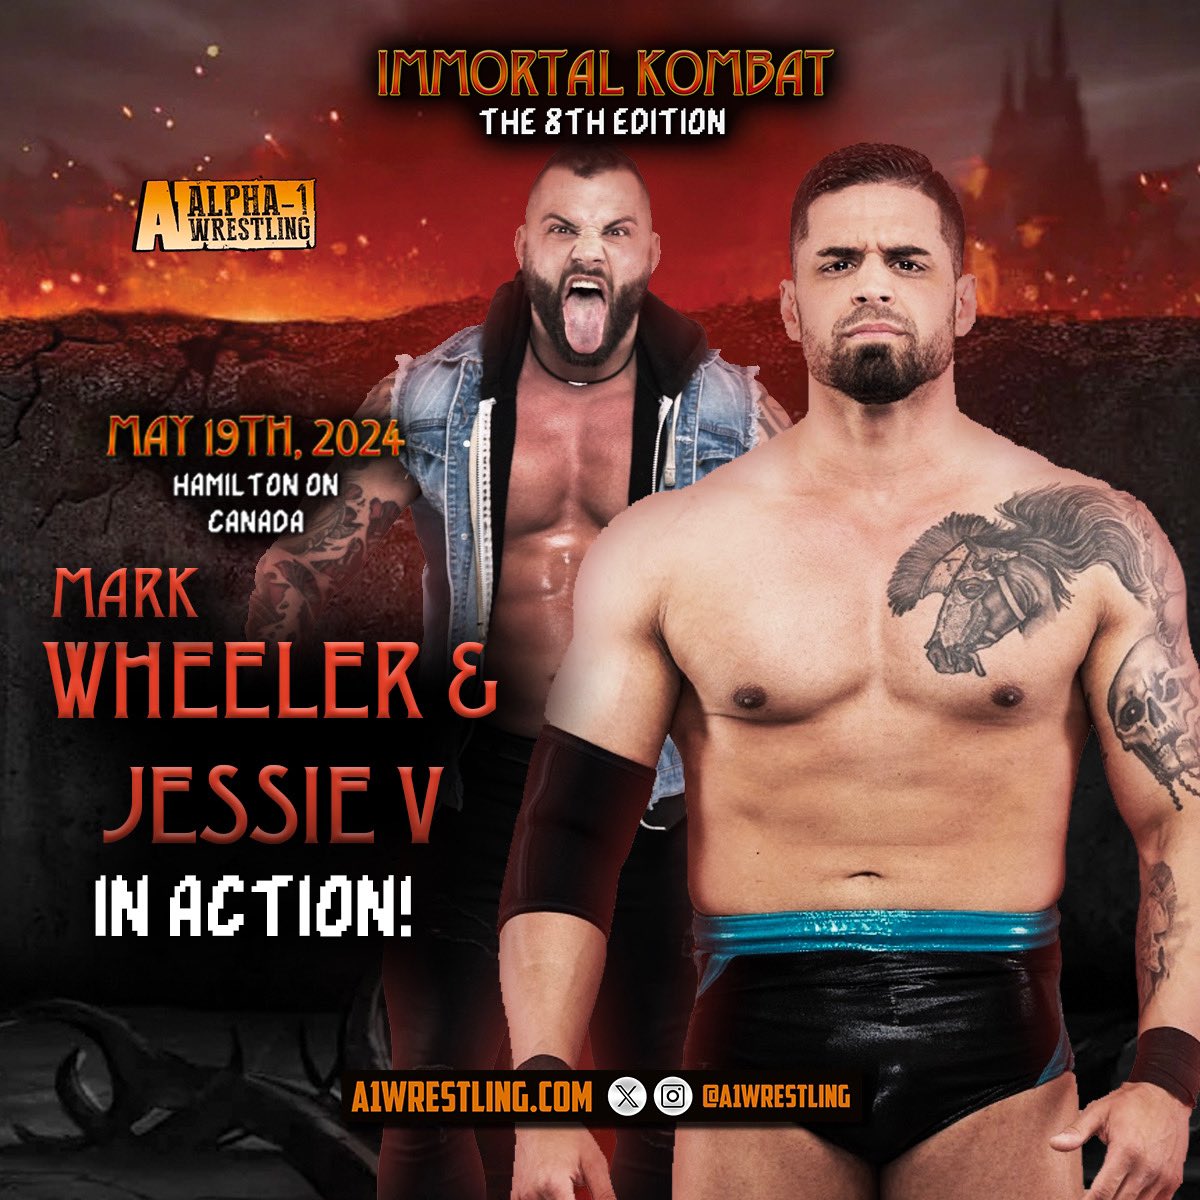 The deadly duo of @_MarkWheeler & @ClutchJessie return to A1 on May 19th! Mark Wheeler enters the first ever OMEGA LADDER MATCH! Jessie V gets another shot at the Outer Limits Title! Ticket info: A1Wrestling.com